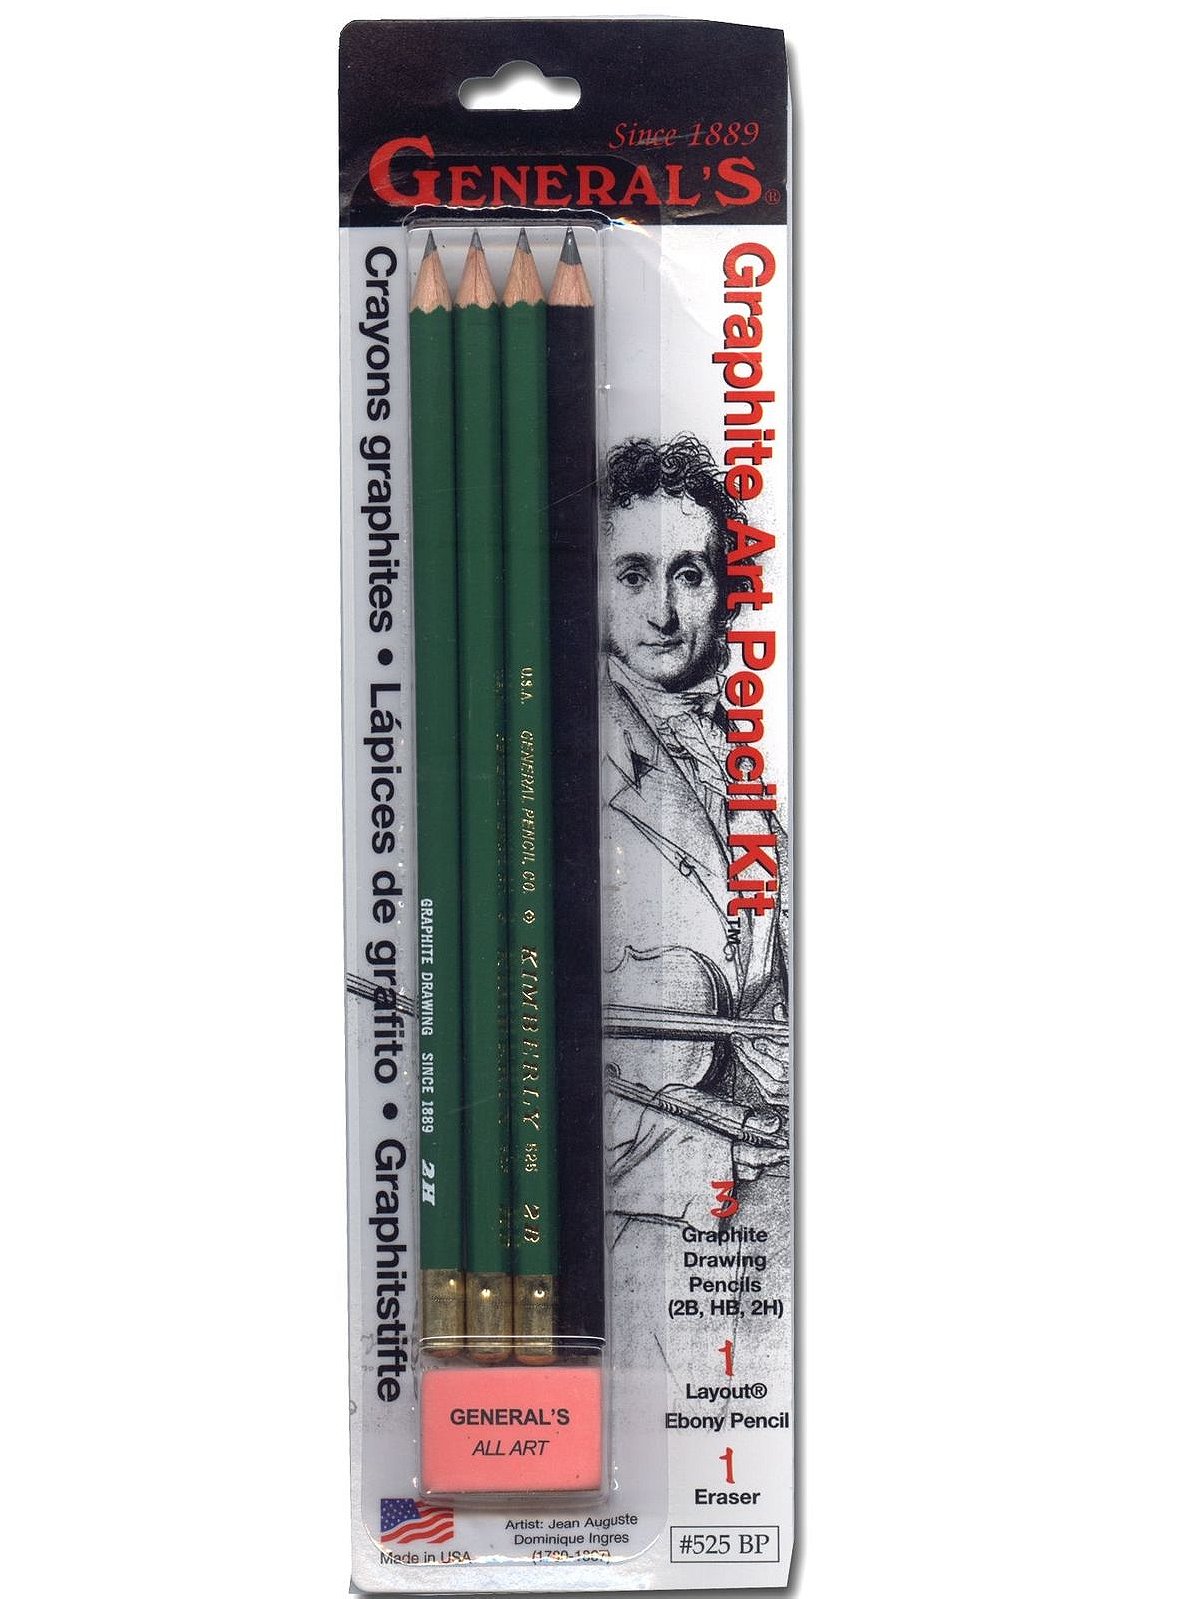 Pencils for writing, drawing and true artists